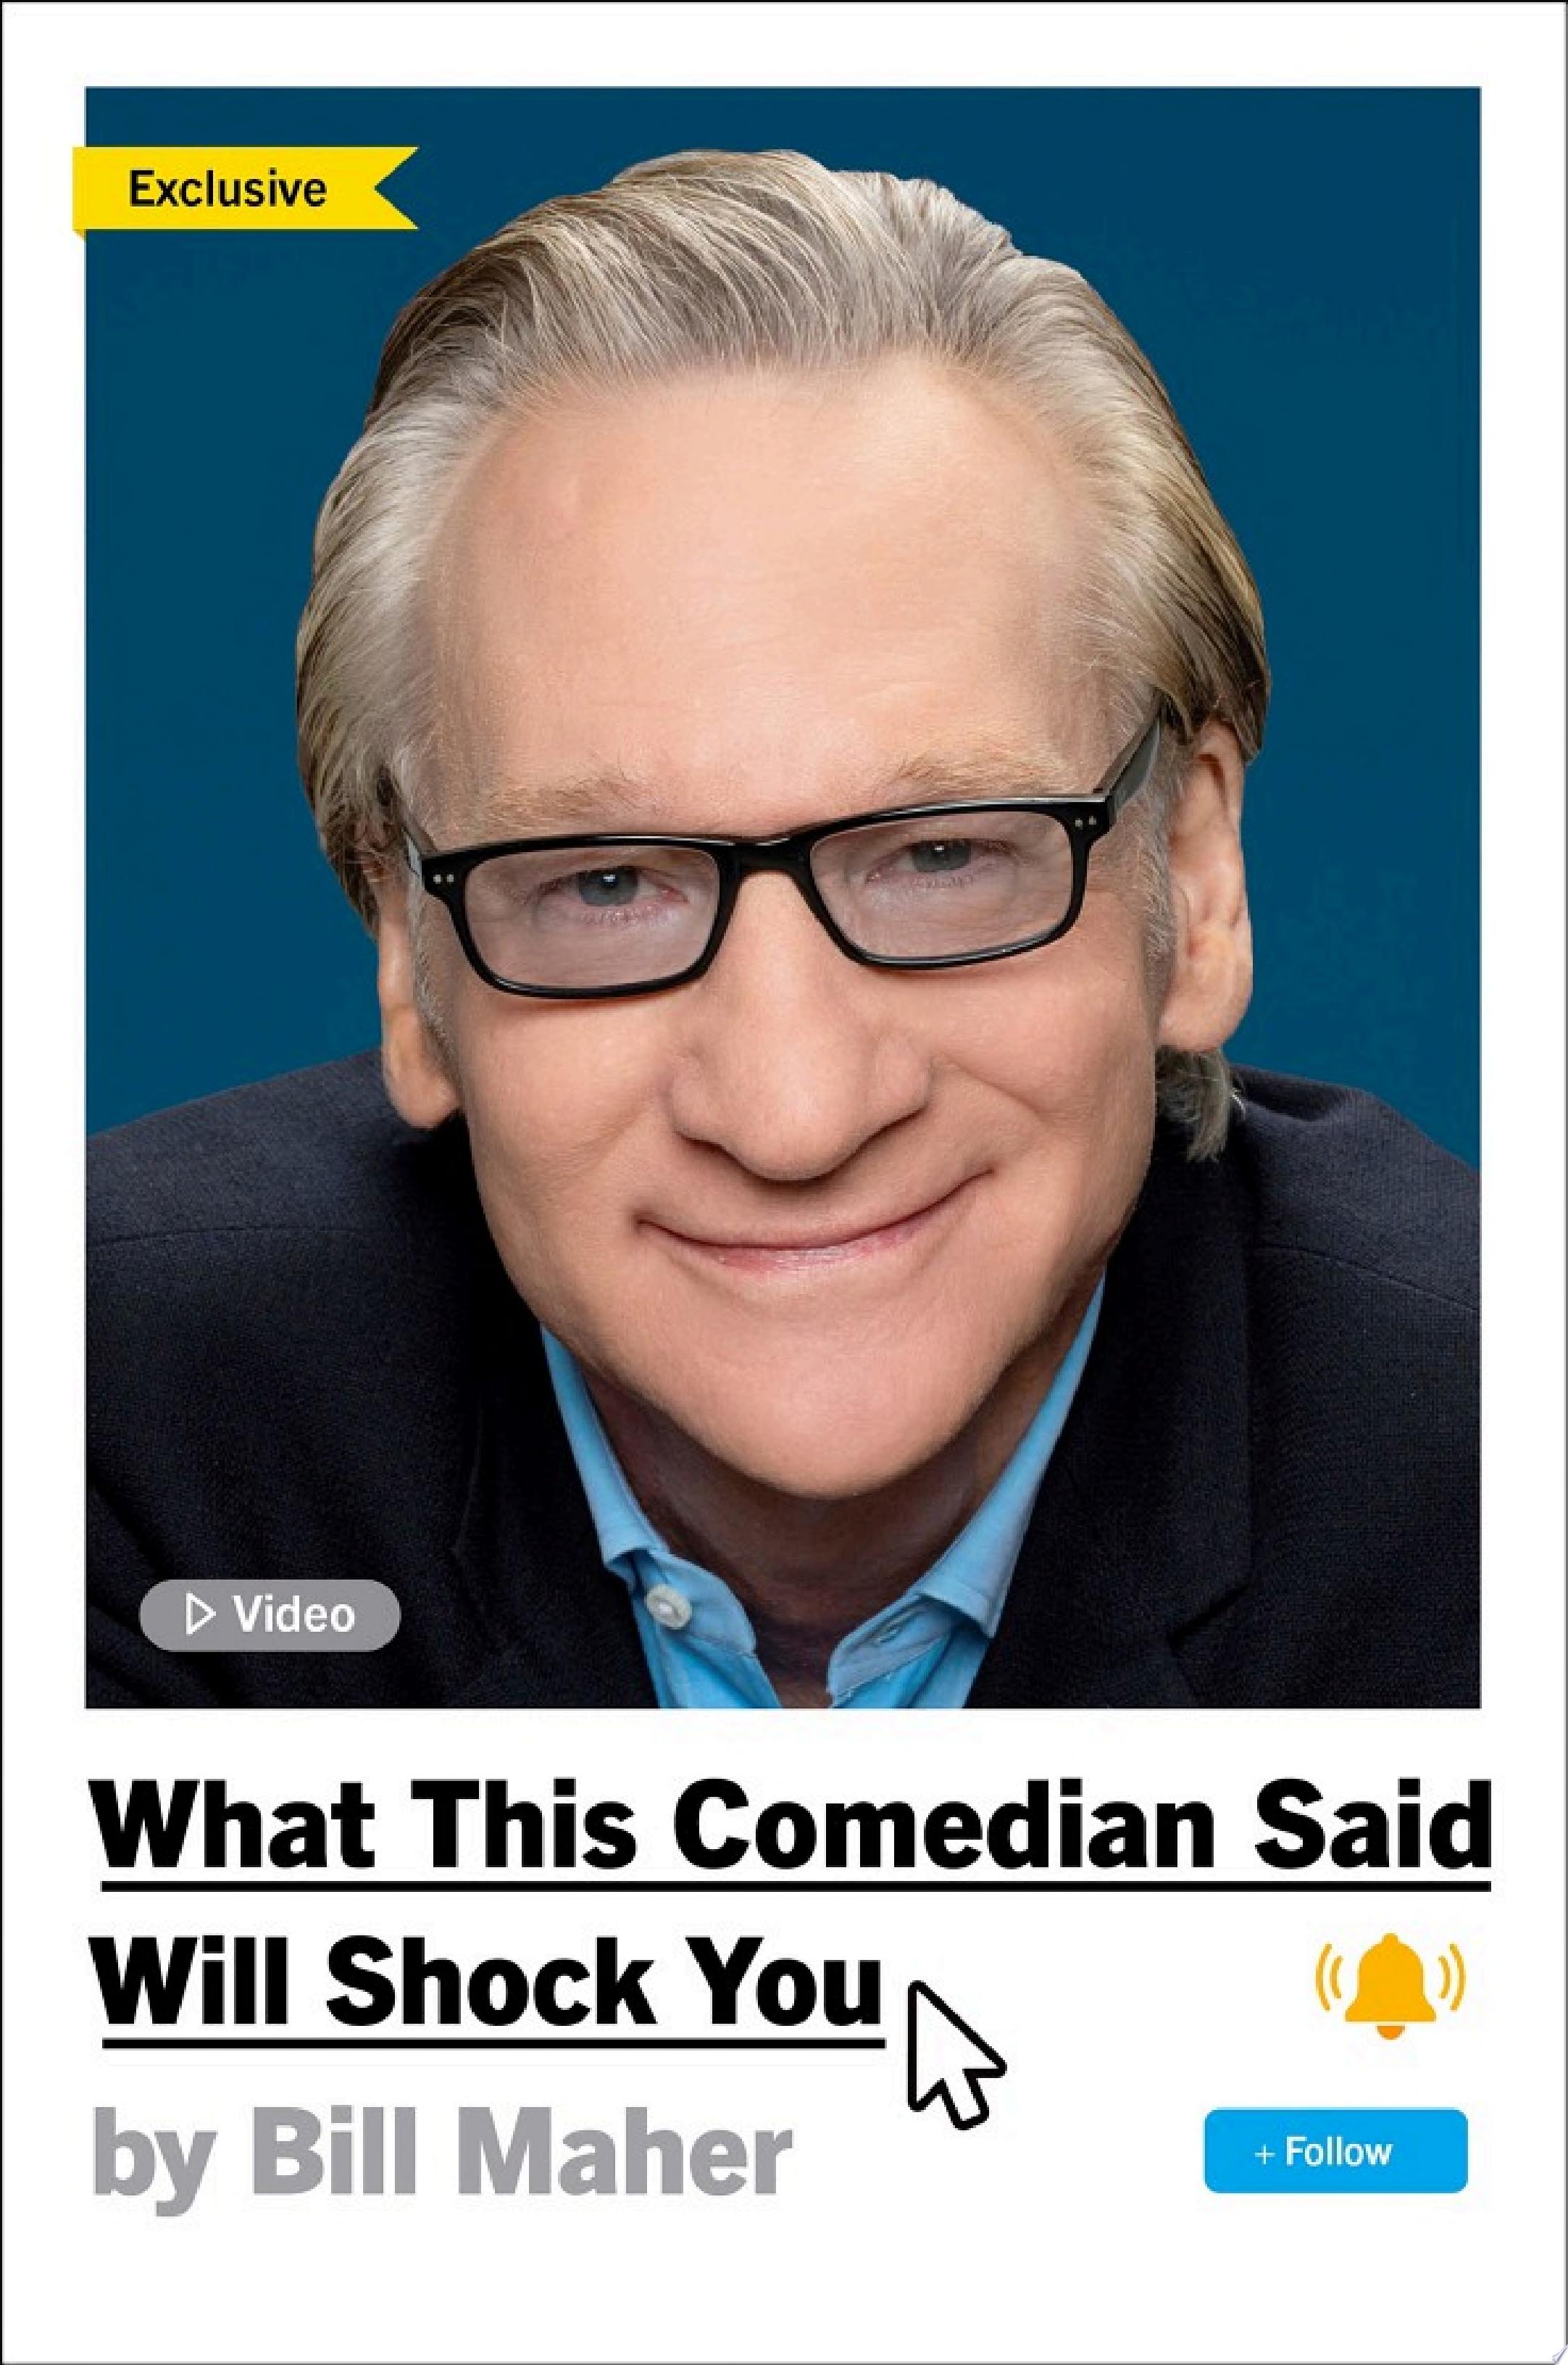 Image for "What This Comedian Said Will Shock You"